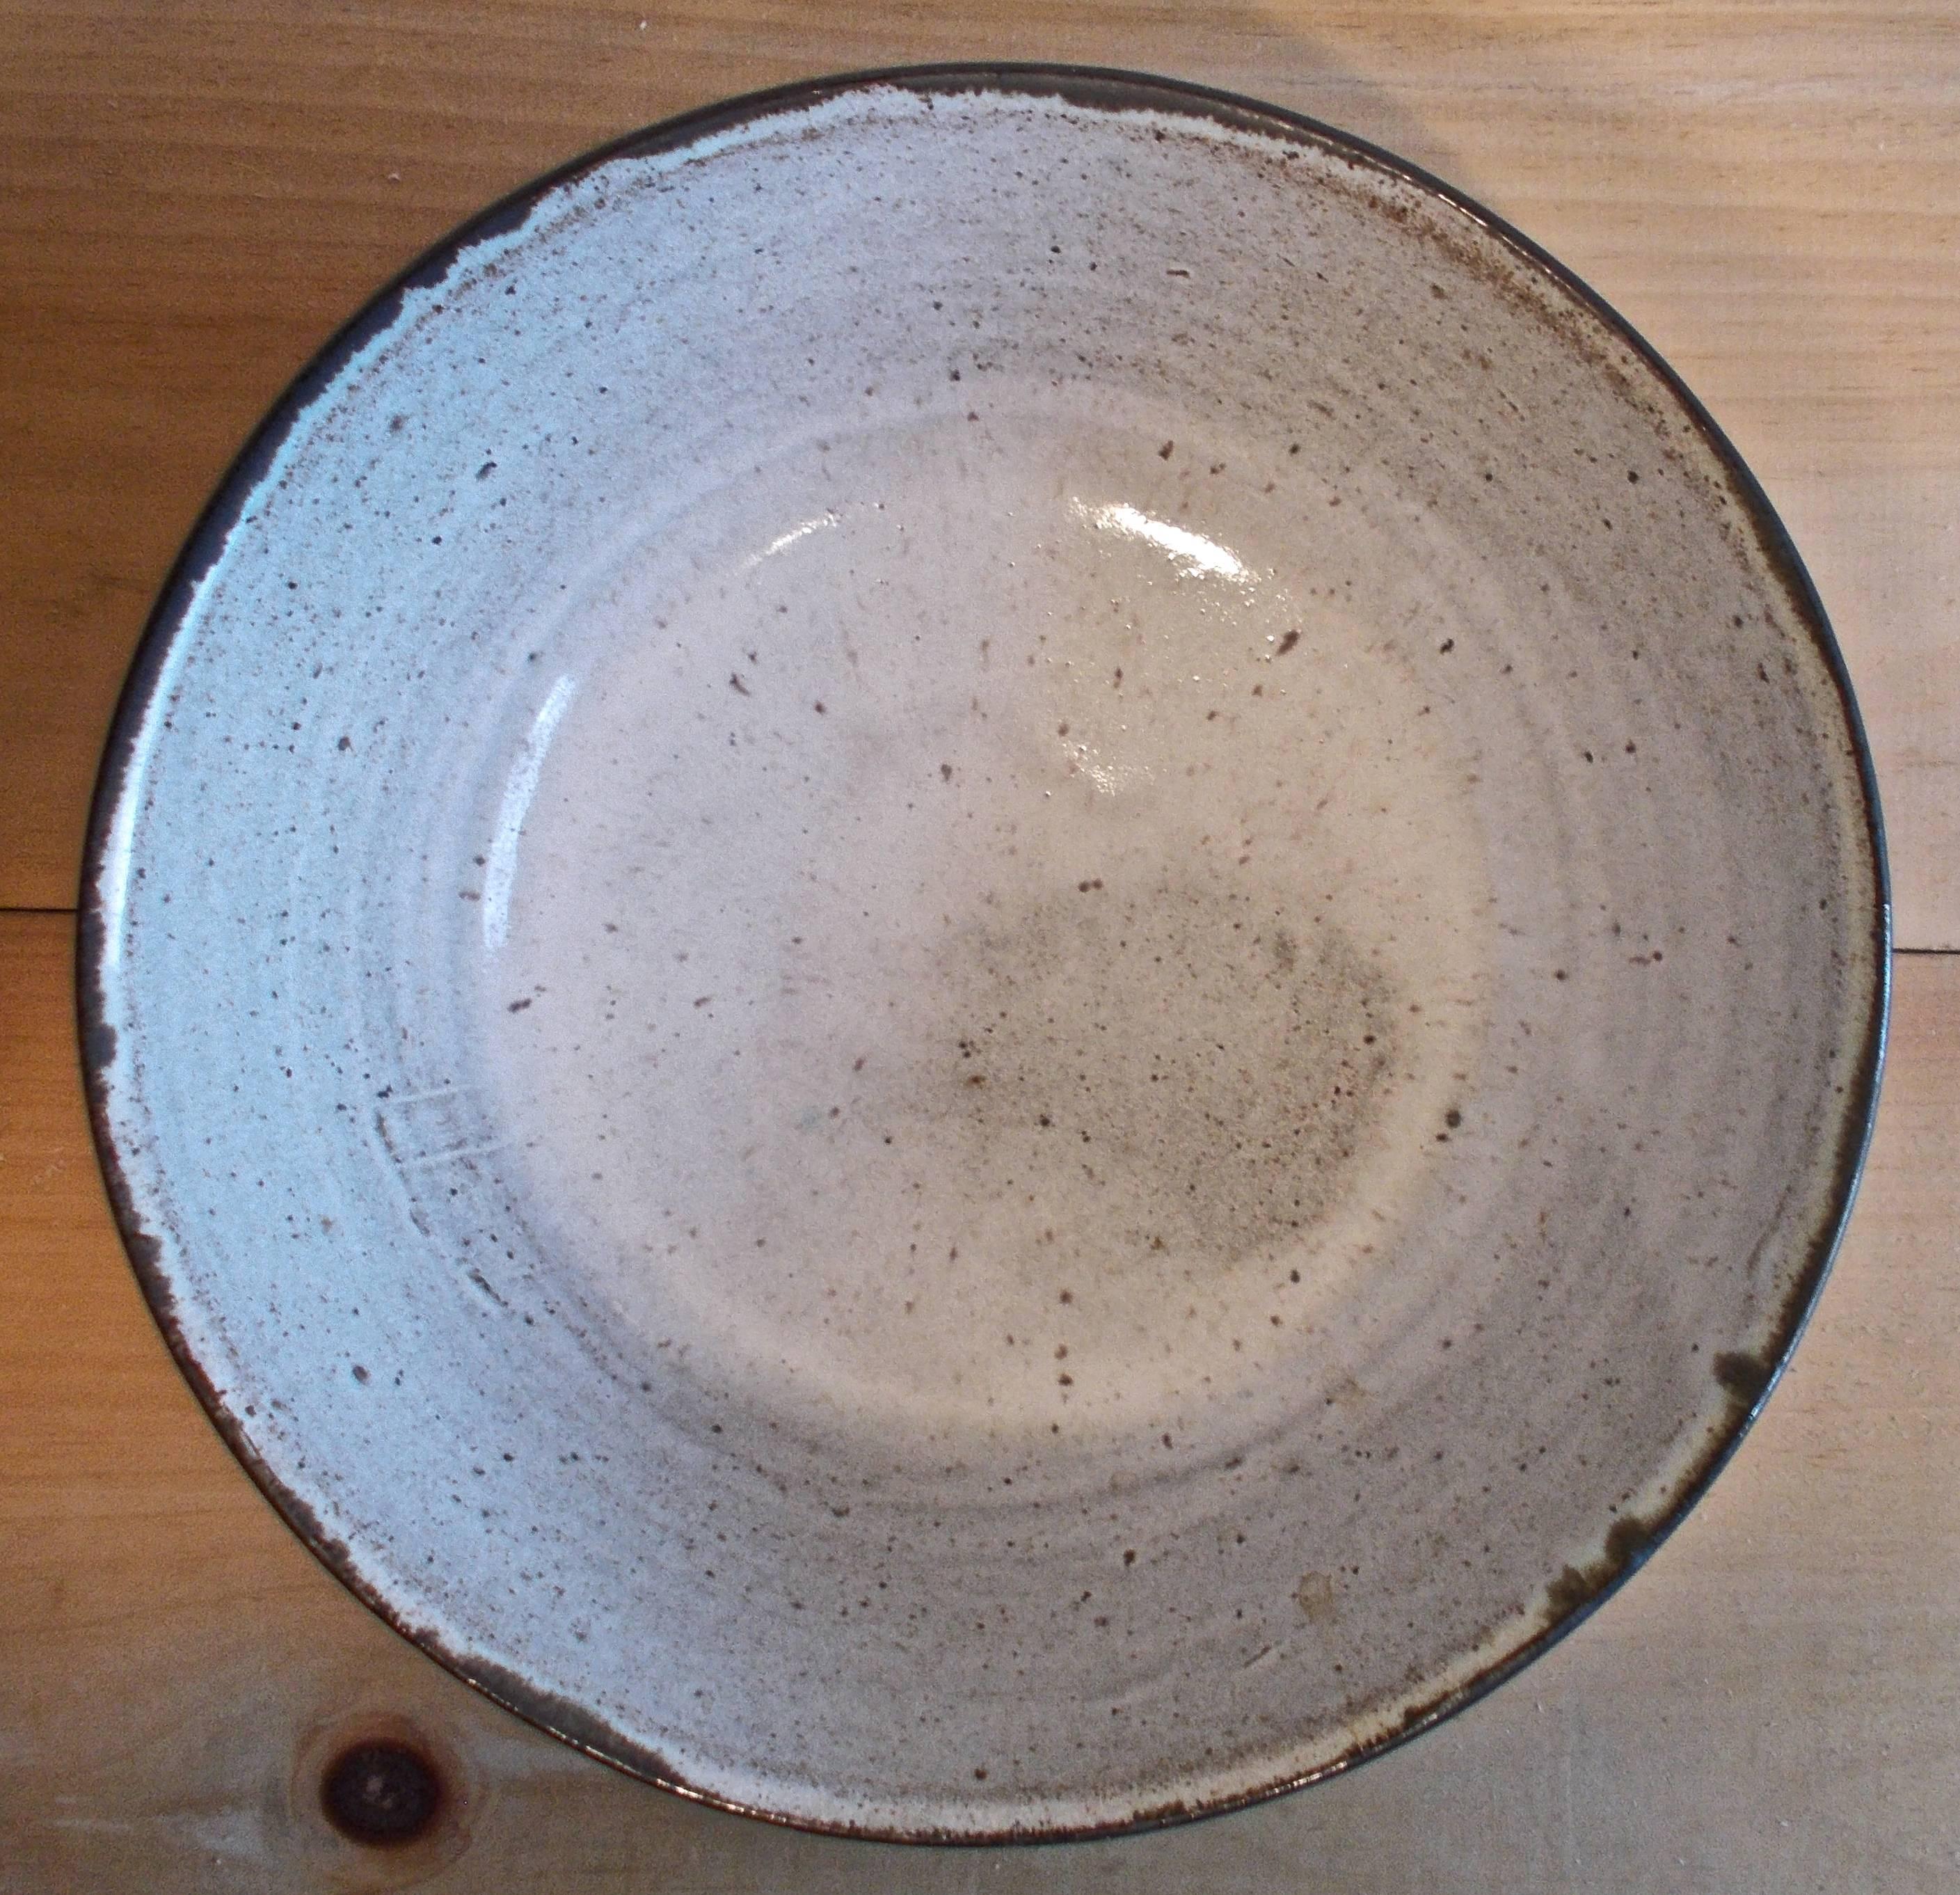 A beautiful bowl very much in Bauhaus aesthetic. Glazed white interior and exterior in 'gun metal'. Signed 'Wildenhain', could possibly mean Marguerite (Friedlander) as well.